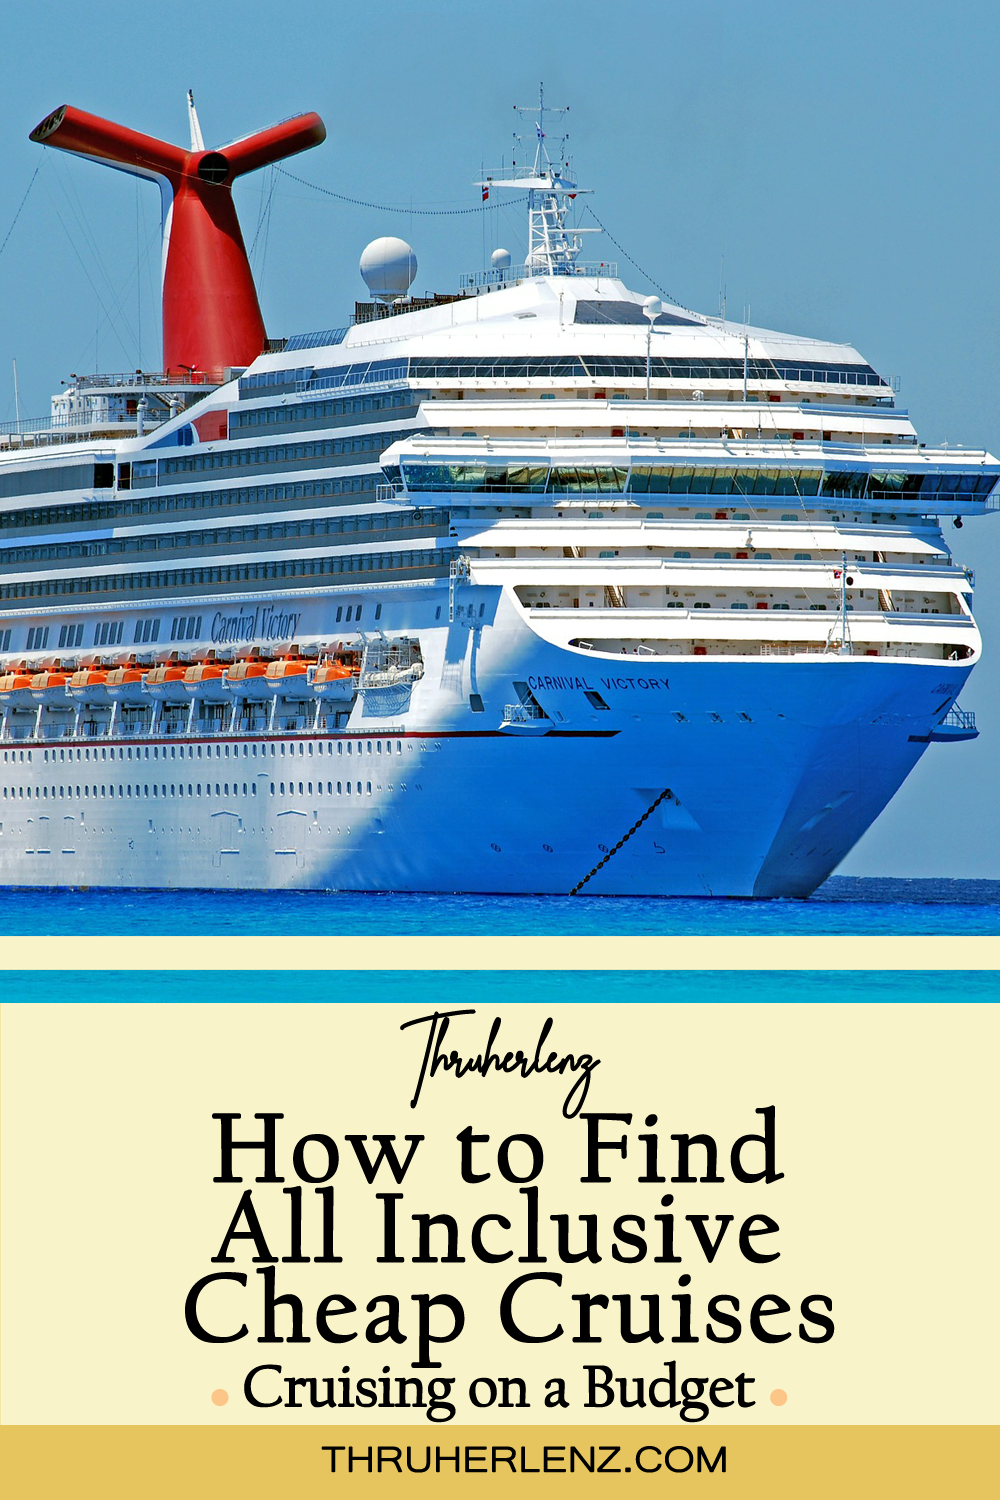 How to Find All Inclusive Cheap Cruises